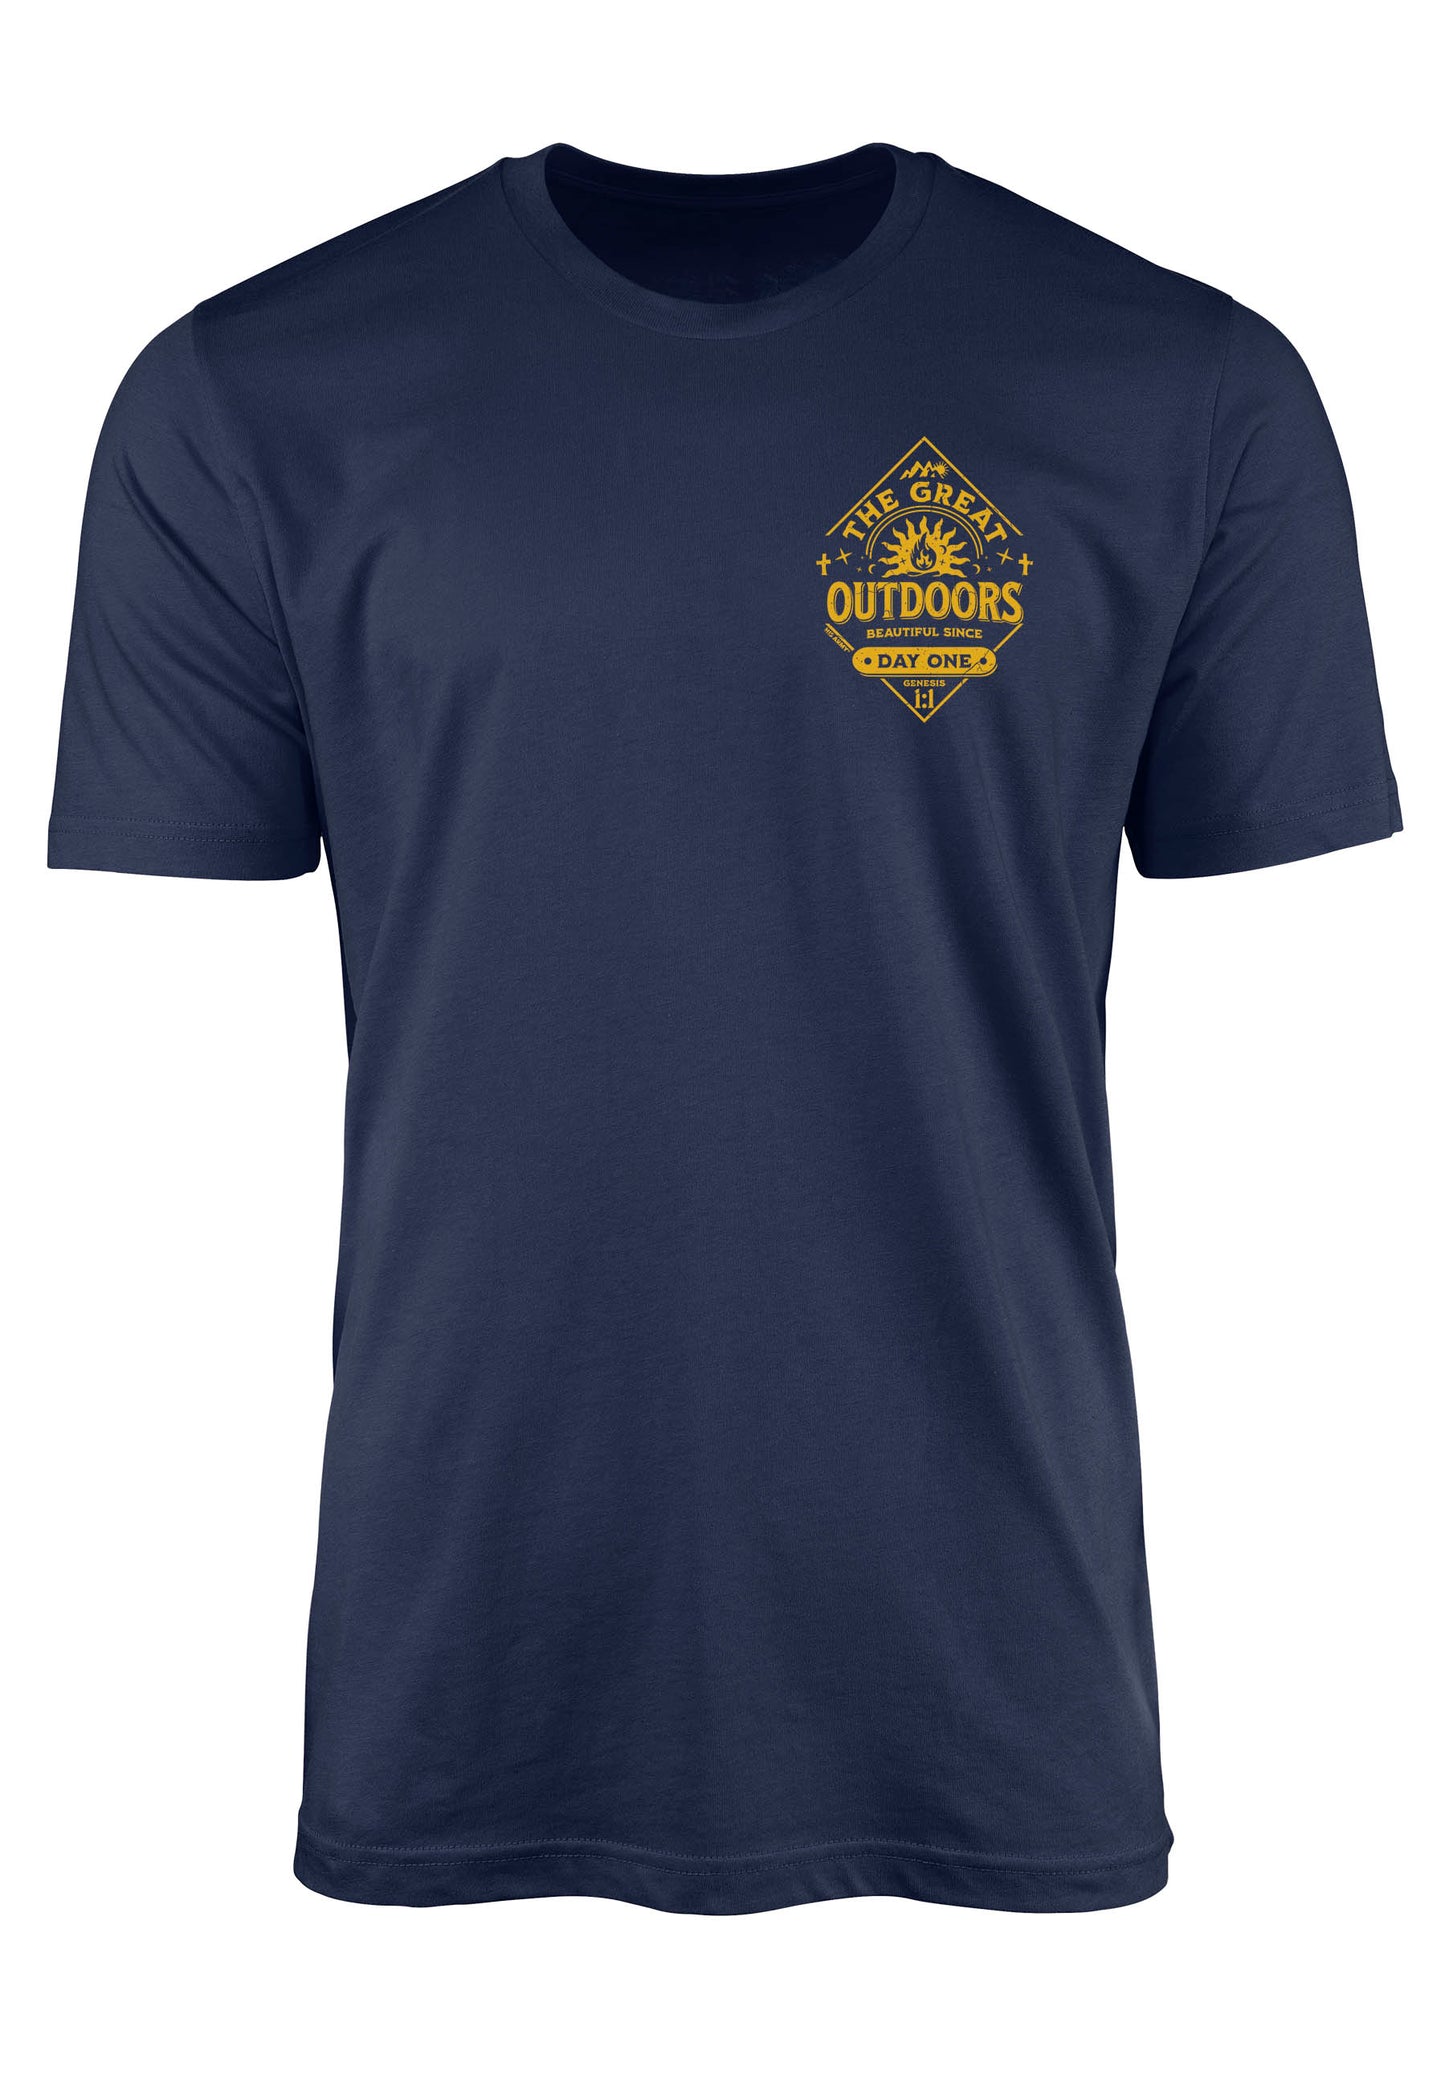 Christian t-shirt for outdoorsy type